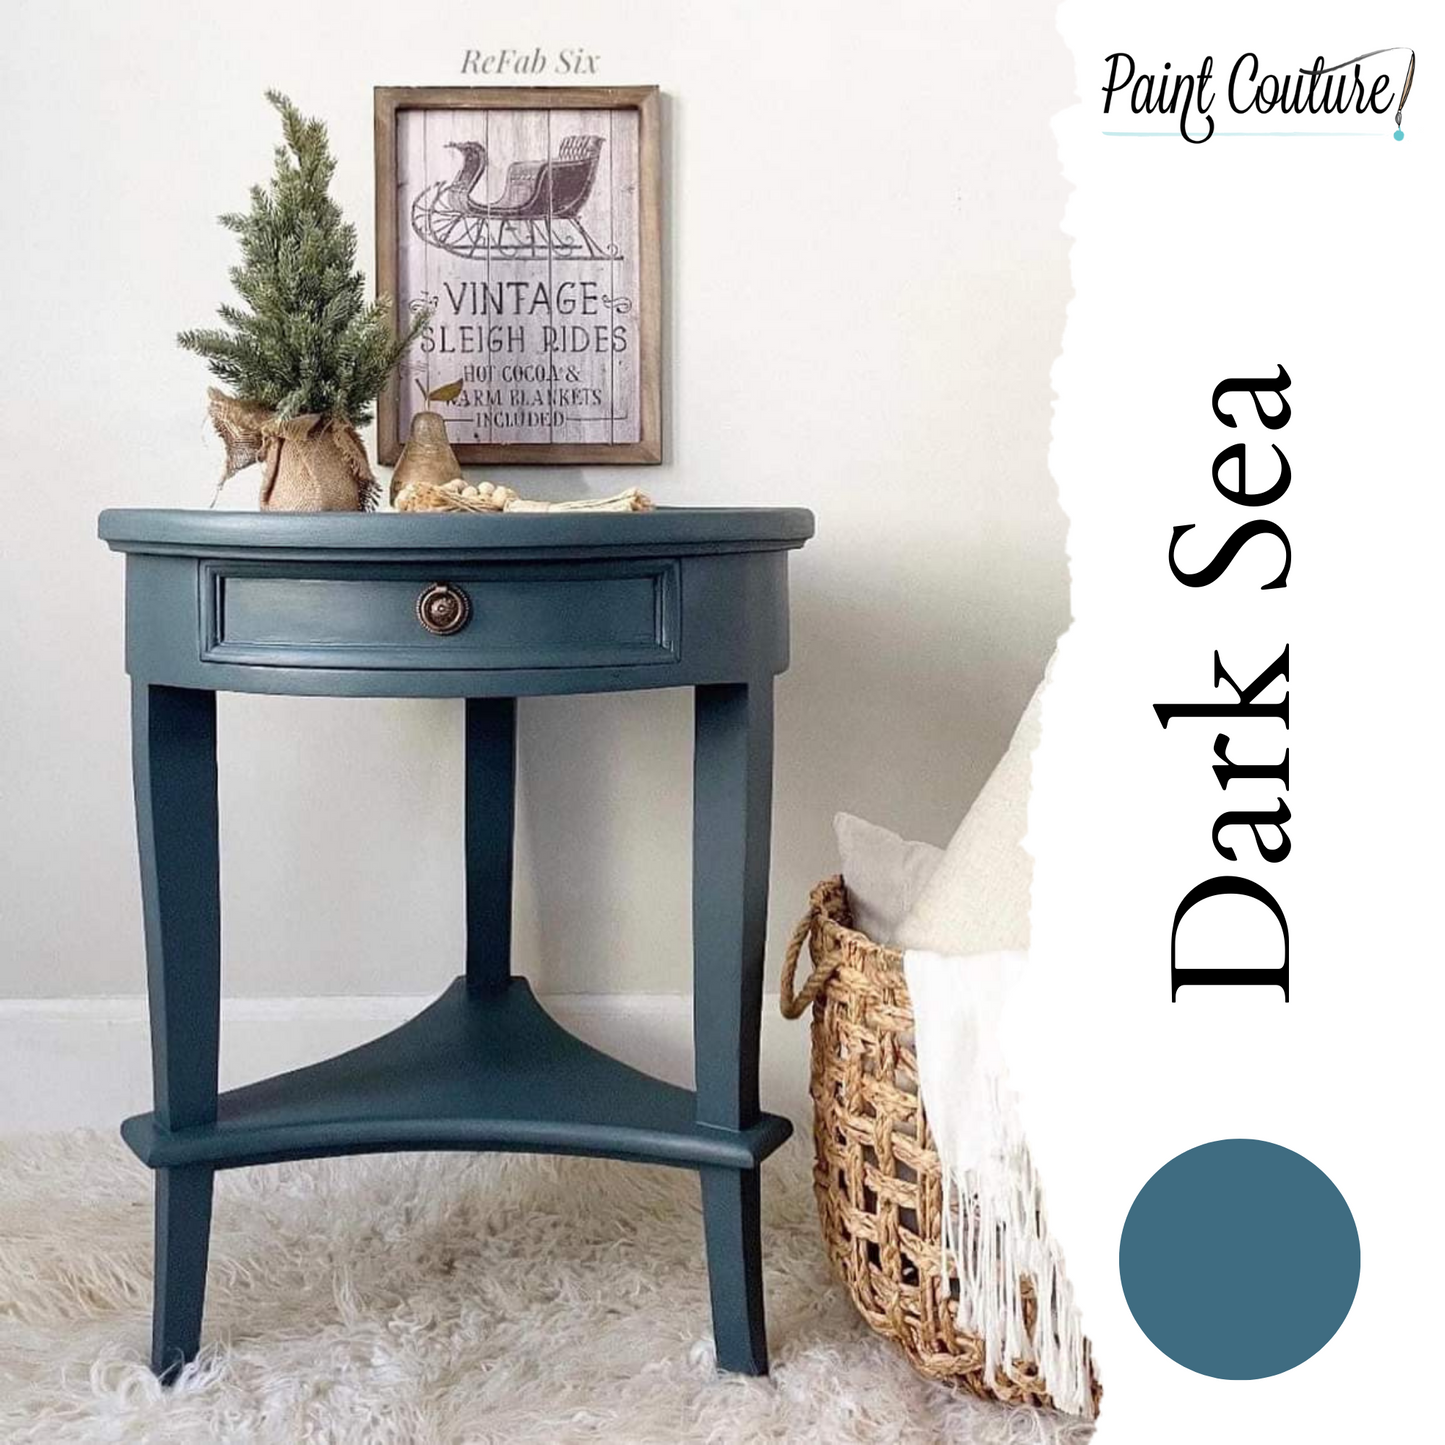 Paint Couture Dark Sea - Acrylic Mineral Paint with a Flat Finish!